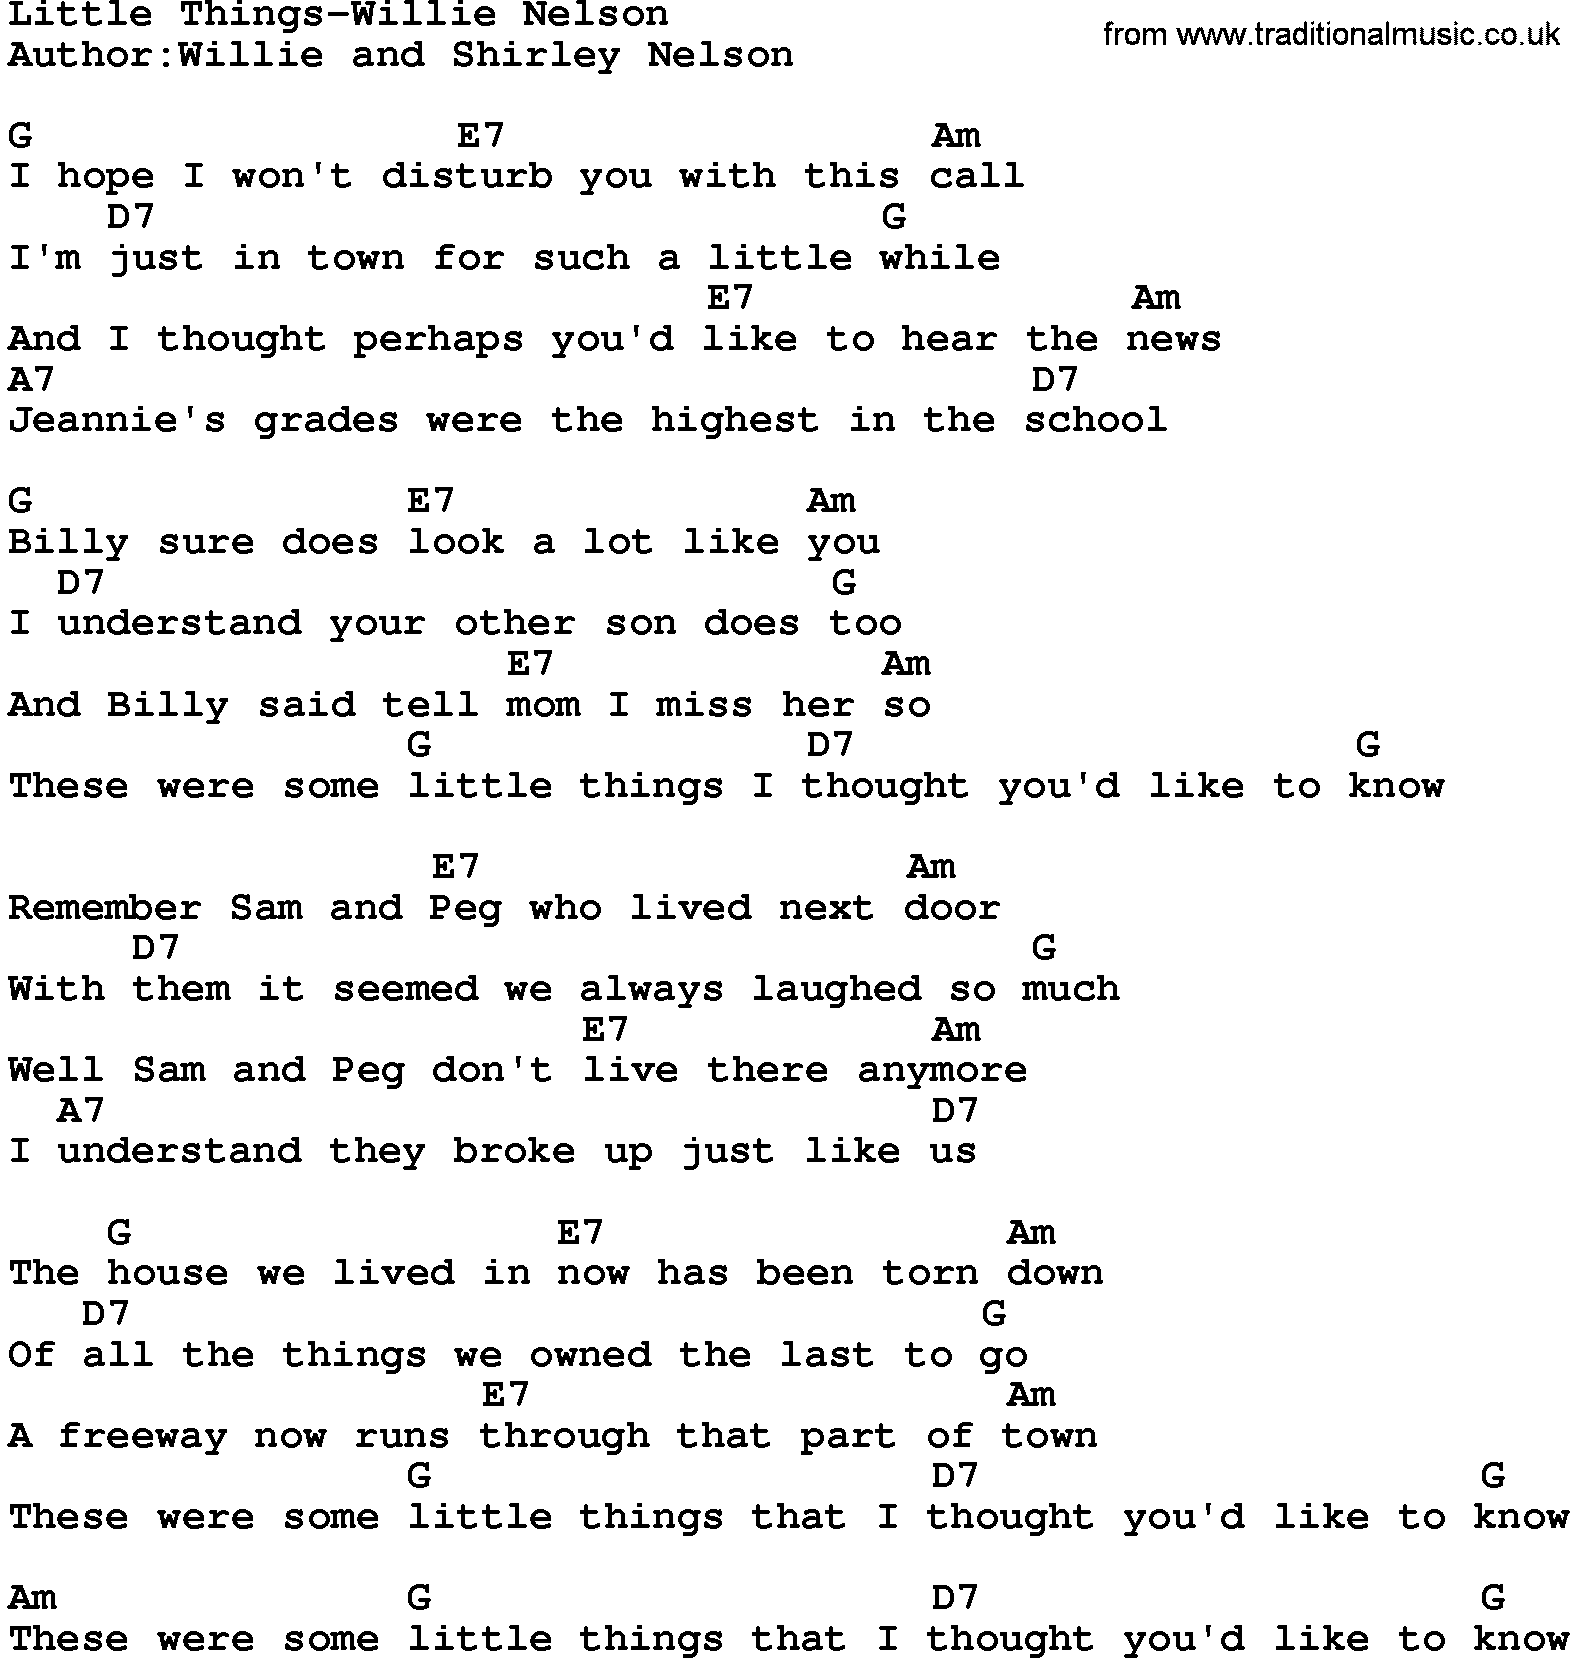 Country music song: Little Things-Willie Nelson lyrics and chords